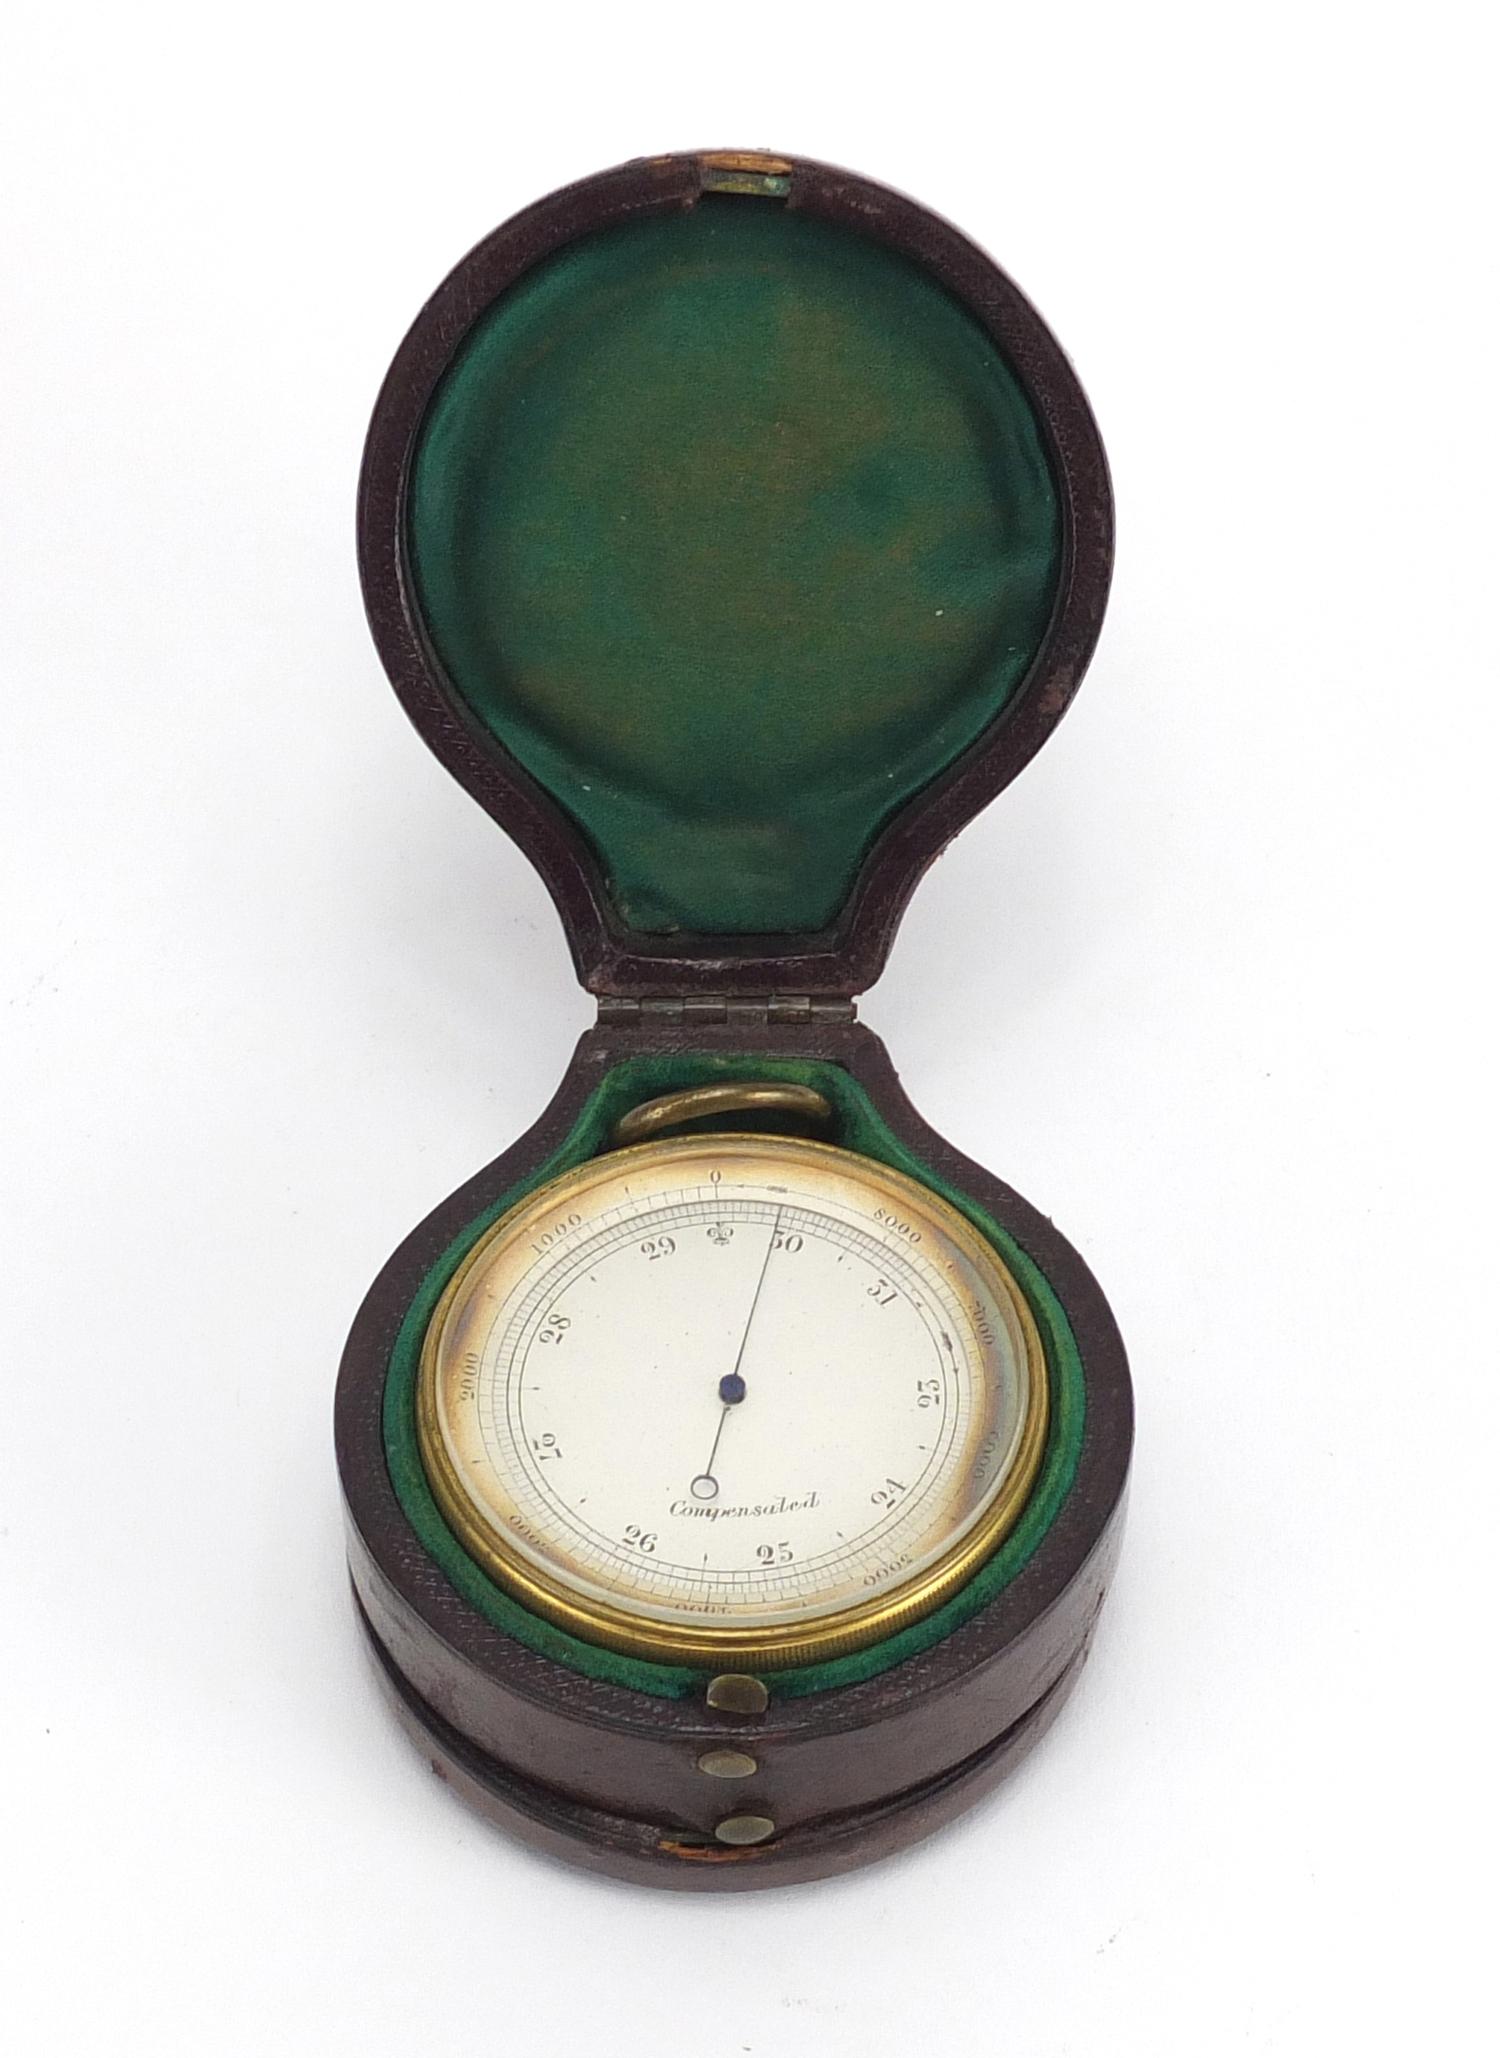 19th century gilt brass pocket weath station with compensated barometer, thermometer and compass, - Image 5 of 8